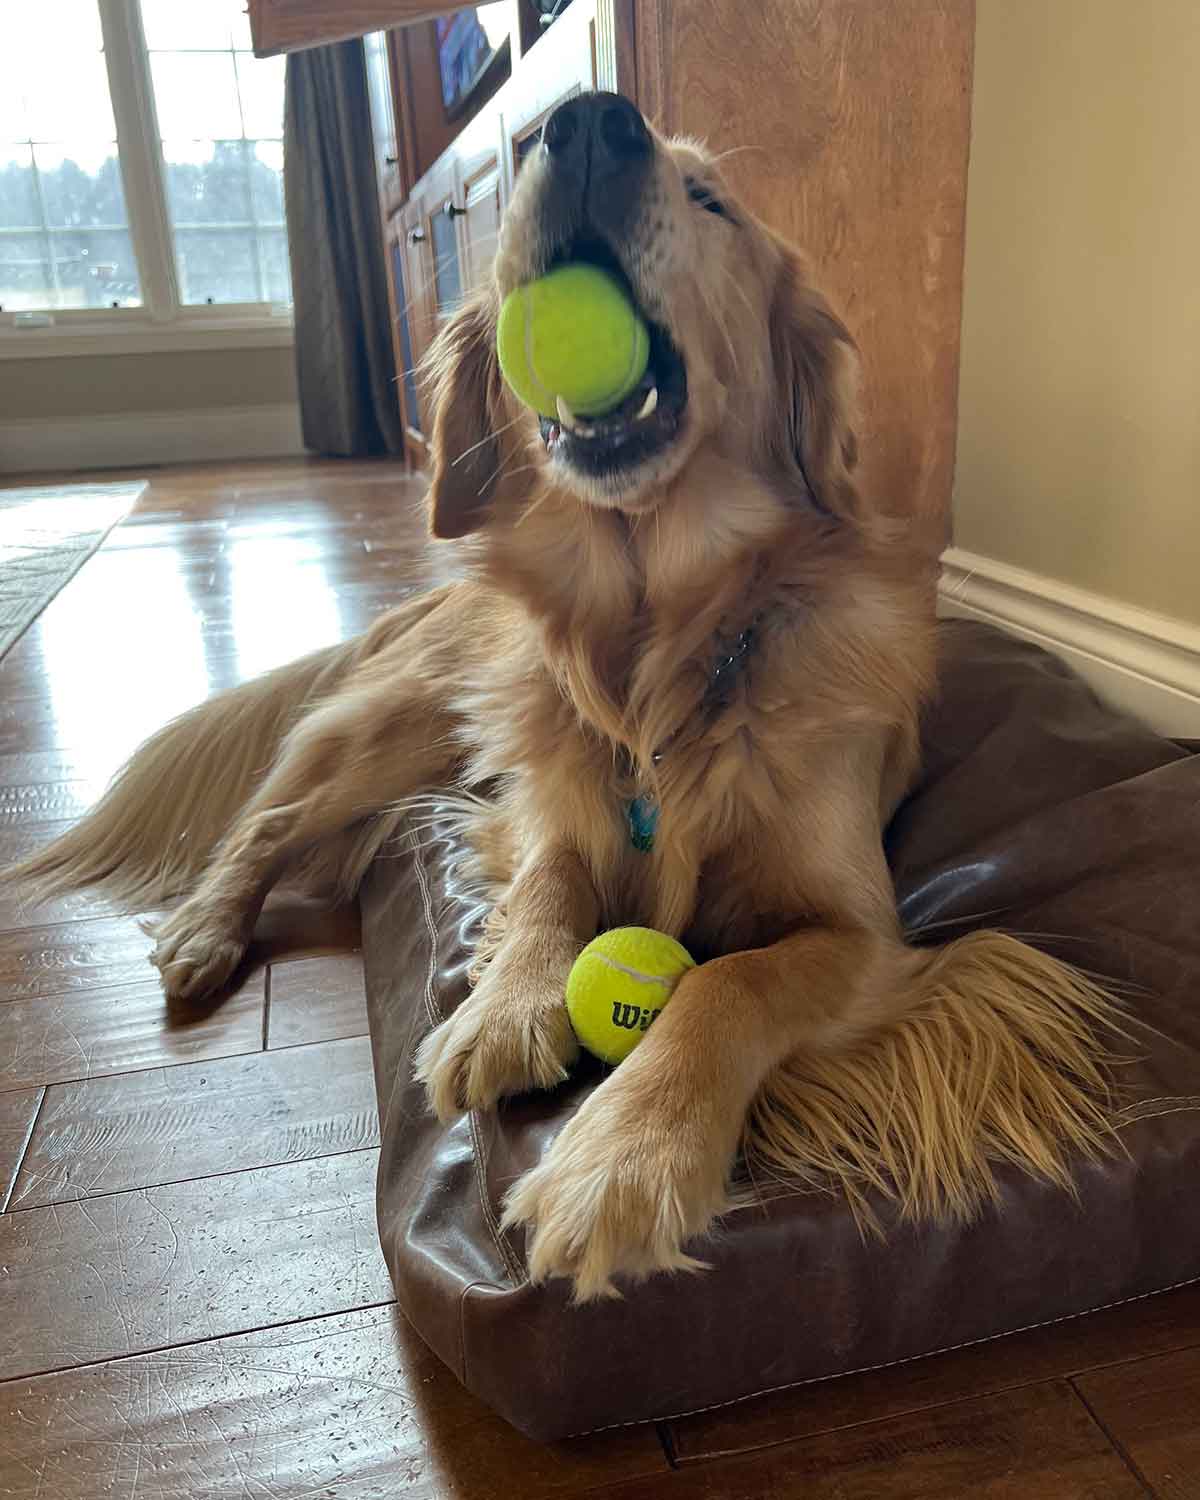 Golden retriever with a tennis ball in its mouth and another ball between its paws.